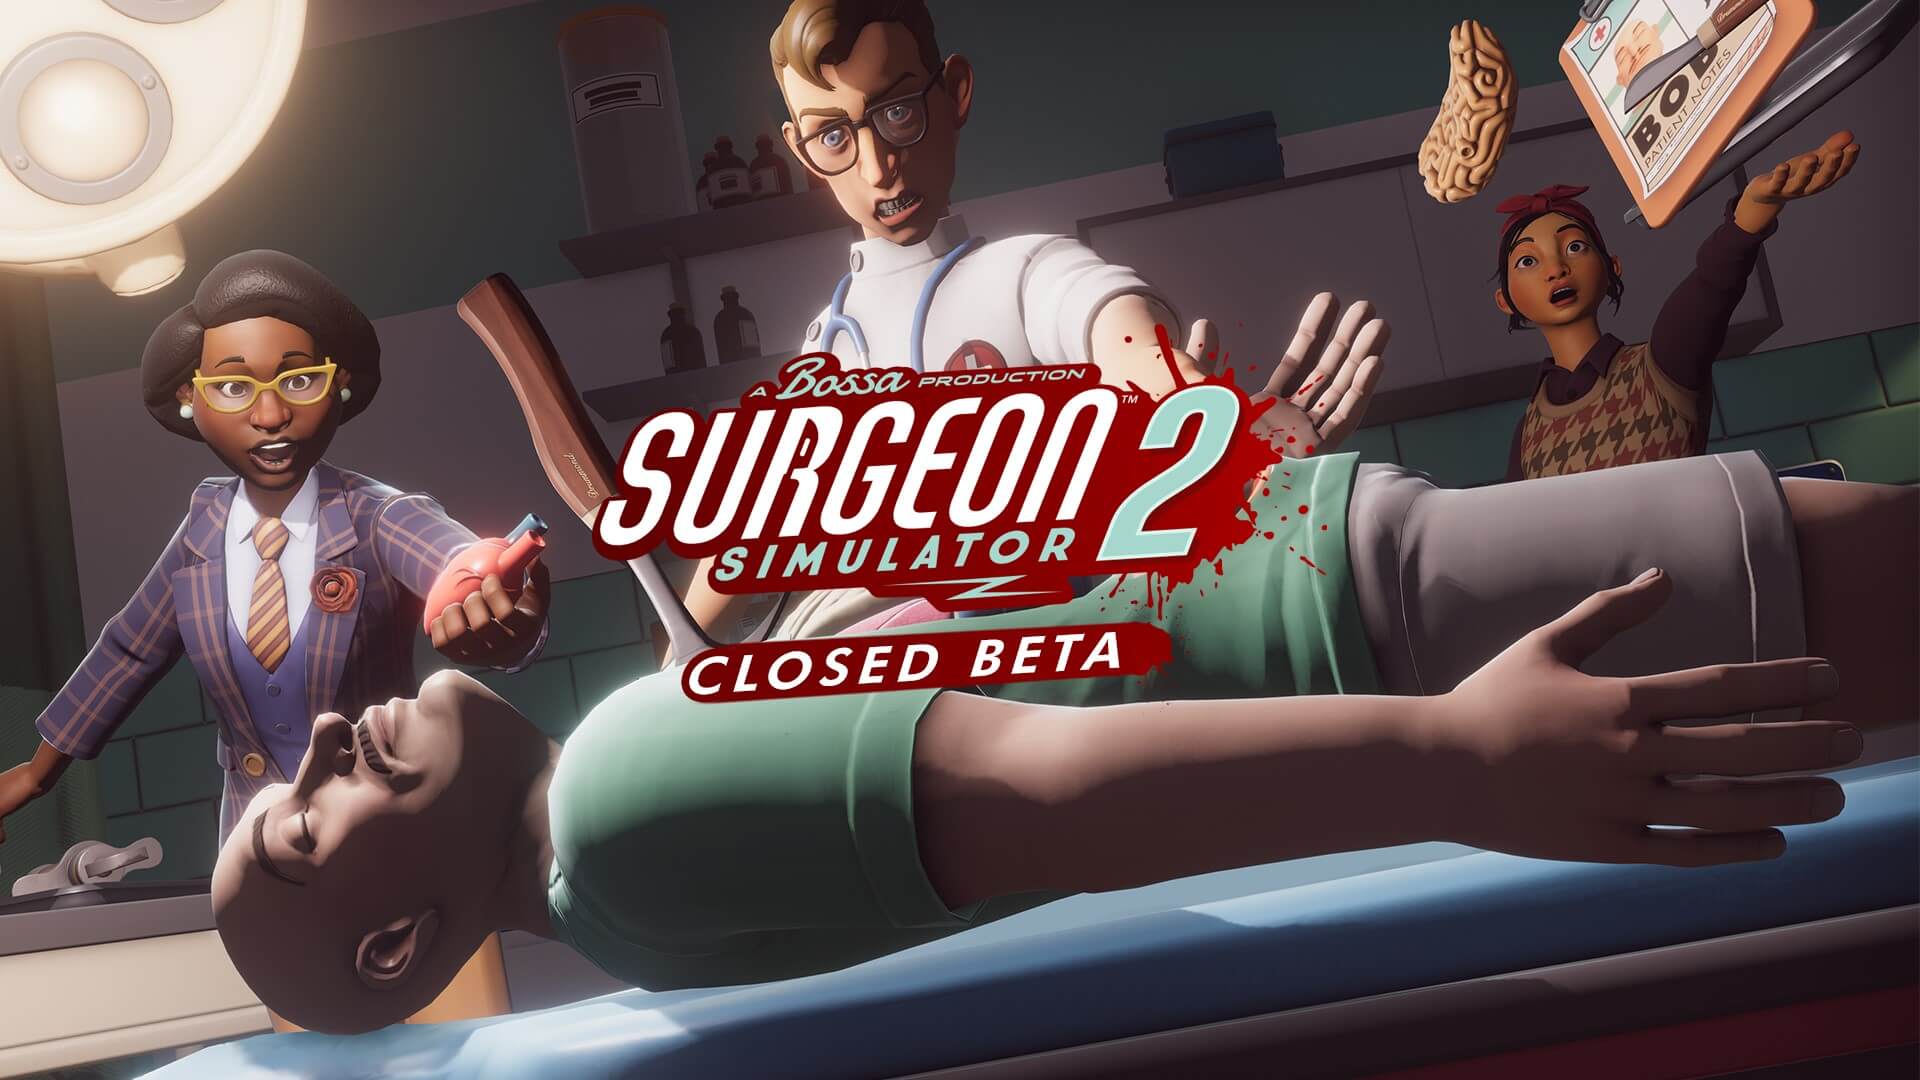 surgery game vr